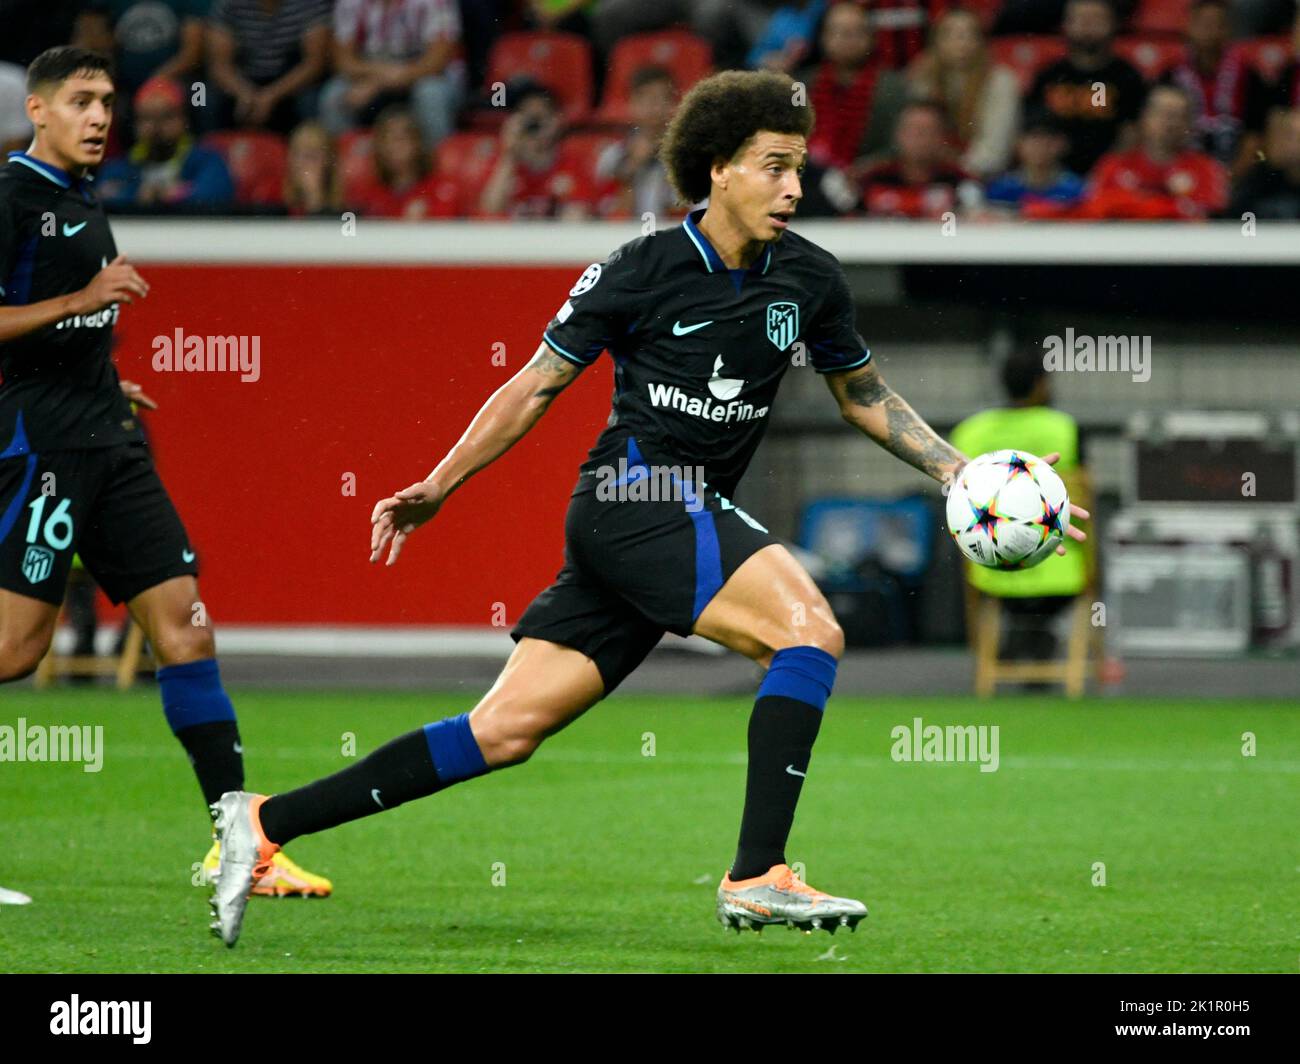 BayArena Leverkusen Germany 13.9.2022, Football: Champions League Season 2022/23, matchday 2, Bayer 04 Leverkusen (B04) vs Atletico Madrid (ATM) —  Axel Witsel (ATM)  UEFA REGULATIONS PROHIBIT ANY USE OF PHOTOGRAPHS AS IMAGE SEQUENCES AND/OR QUASI-VIDEO Stock Photo